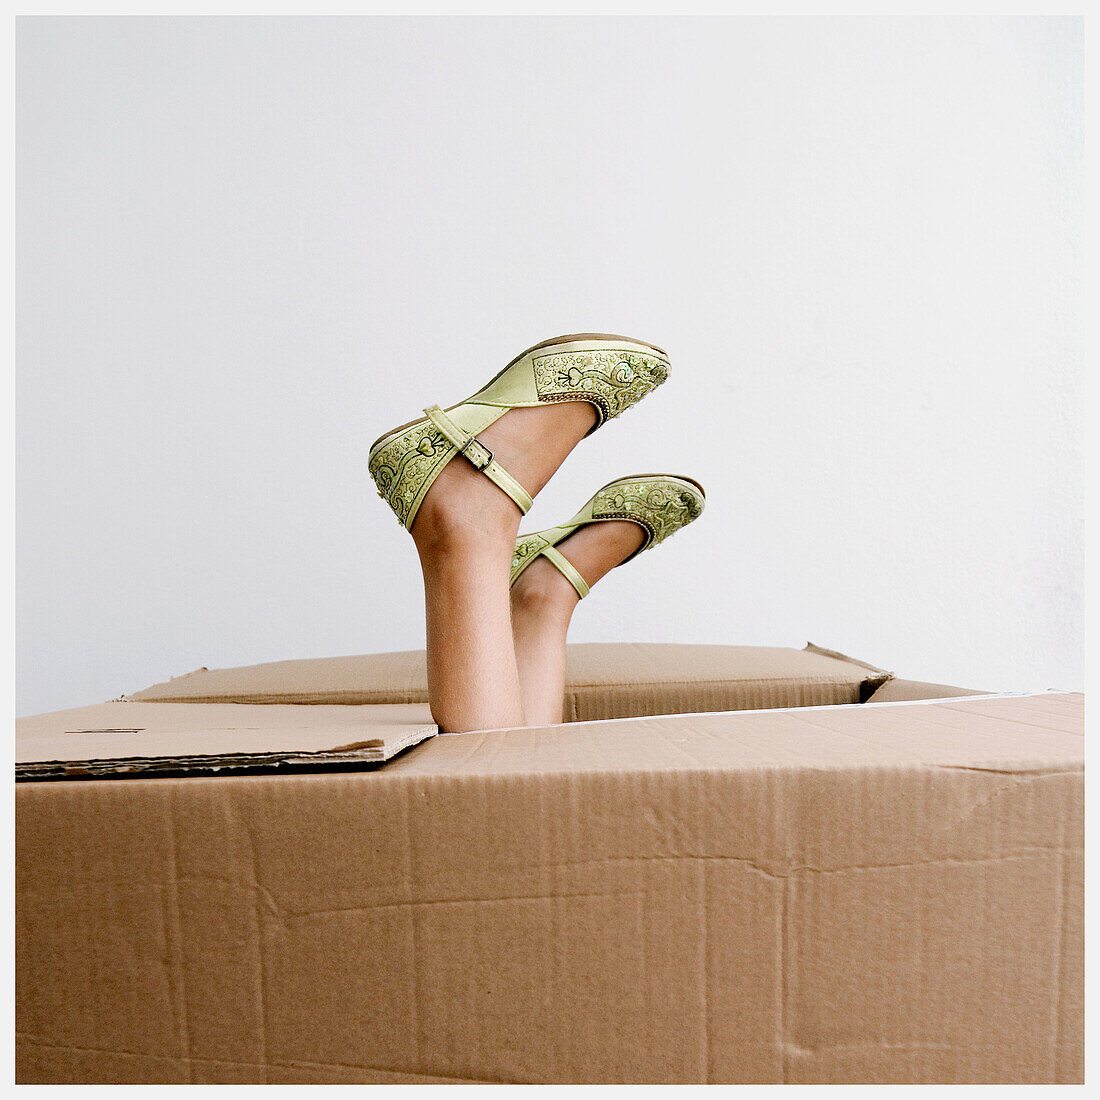  Amusing, Box, Boxes, Child, Children, Color, Colour, Contemporary, Feet, Female, Foot, Funny, Girl, Girls, Human, Indoor, Indoors, Interior, Kids, Odd, One, One person, Package, Packages, Parcel, Parcels, People, Person, Persons, Shoe, Shoes, Single pers